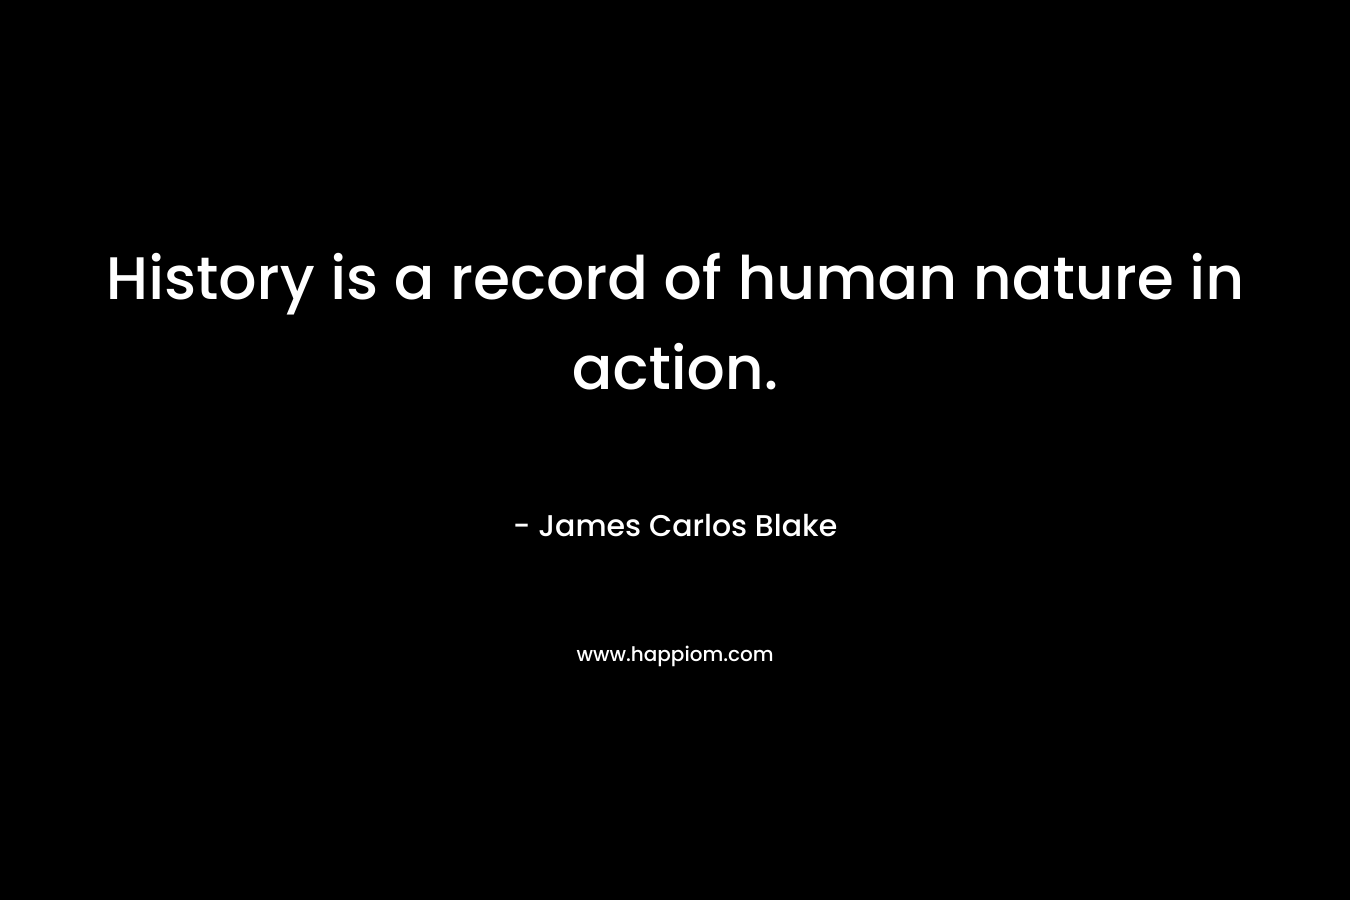 History is a record of human nature in action.